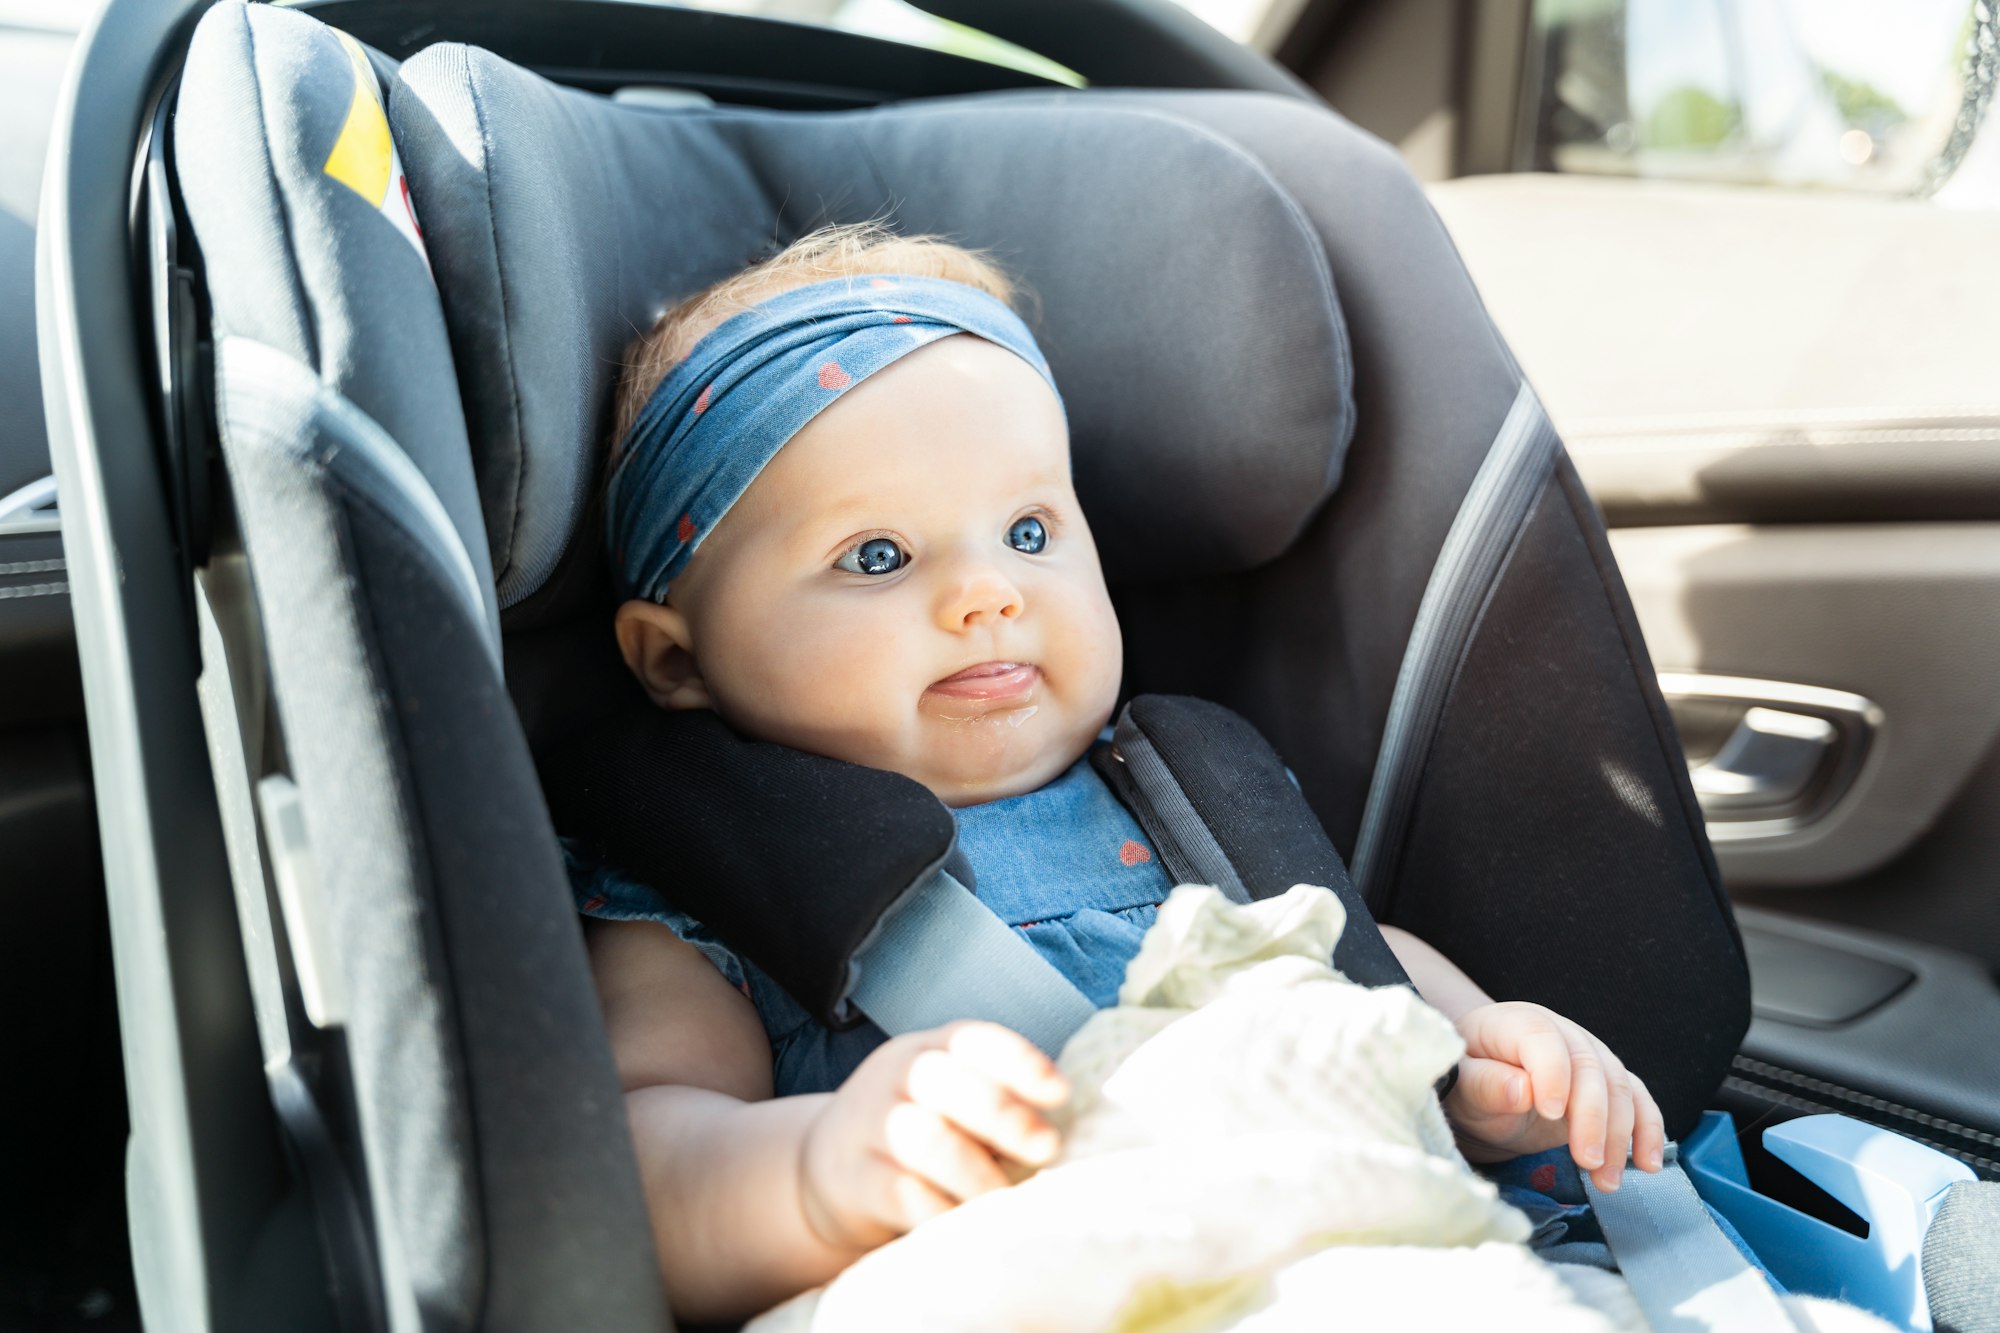 Baby girl sitting in an infant car seat, safety travelling by car with little child.